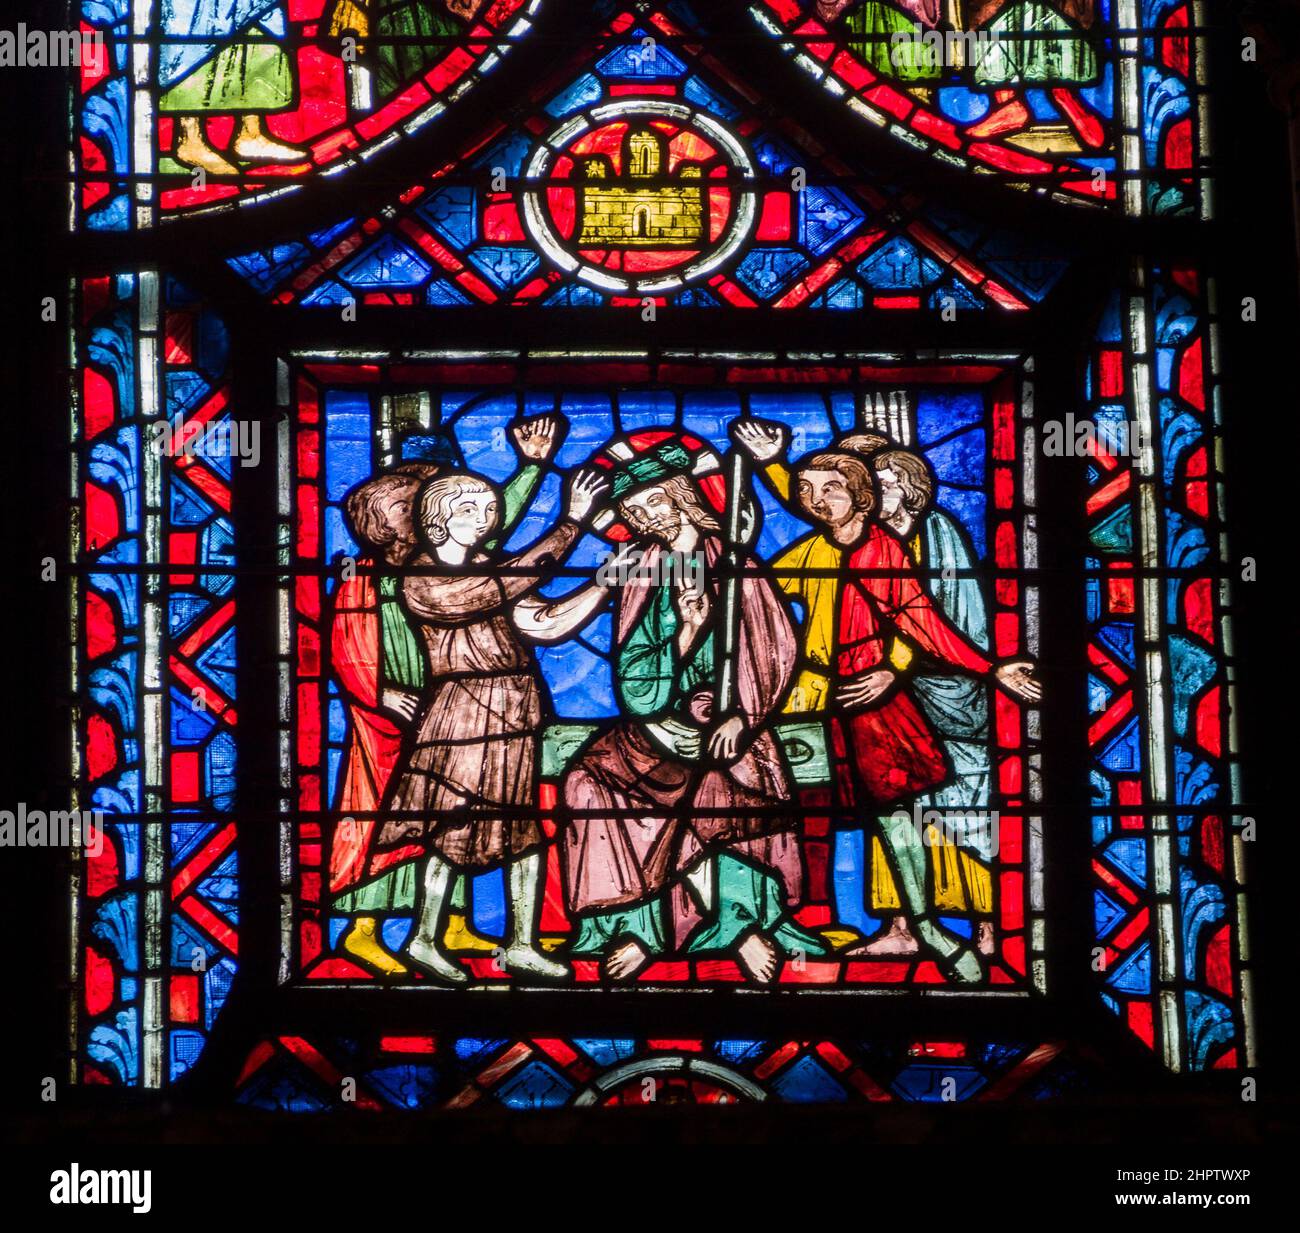 All Hail the Christ in Stained Glass: Detail fom an ancient stained glass window in Sainte Chapelle. A crowd of men surround a sitting figure of Christ welcoming or prasing him. Christ holds up a two finger victory salute. Stock Photo